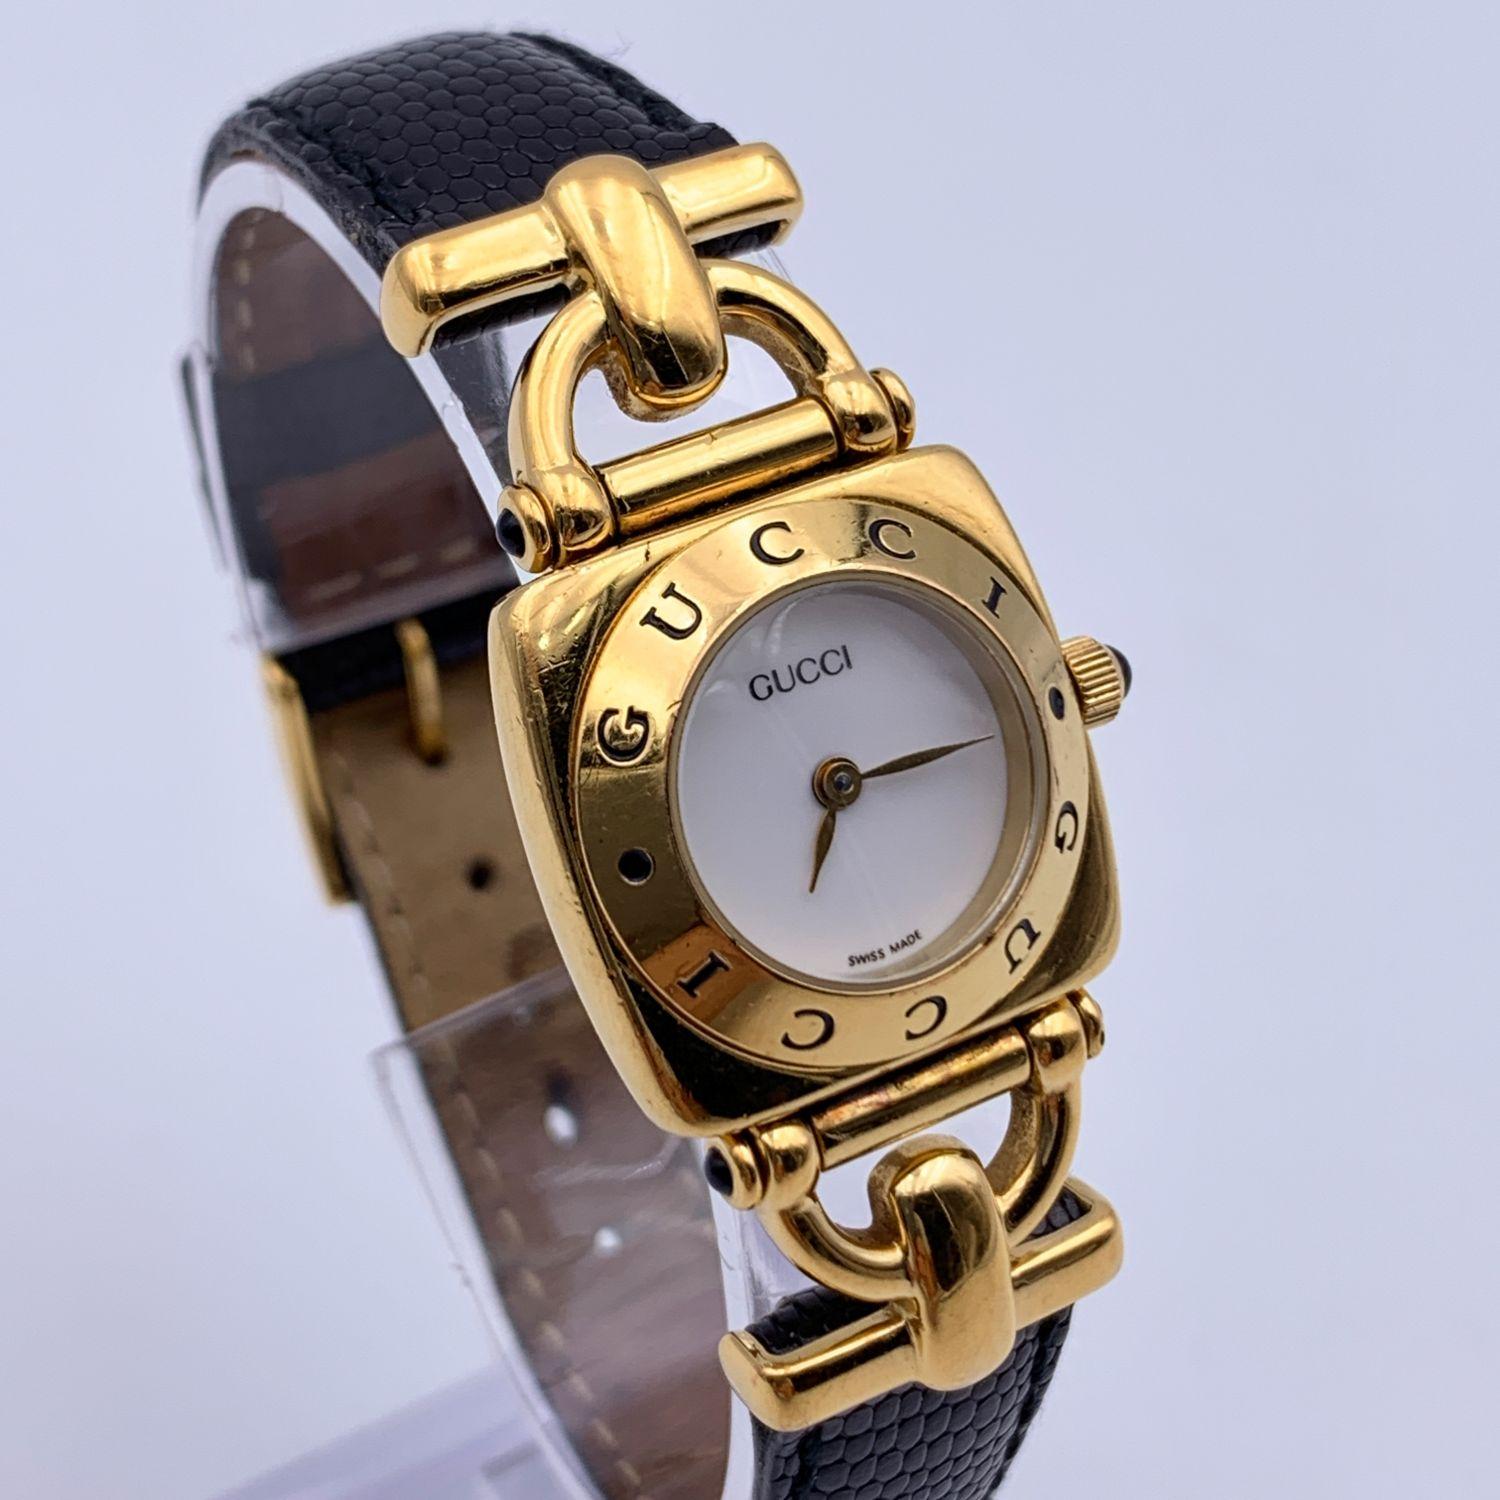 Gucci 6300 L Gold plated stainless steel wrist watch from the 90s. White dial and Sapphire crystal. Swiss Made Quartz movement. Gucci written on face and on the bezel .Water Resistant. Black leather trap with buckle closure (GG logo engraved on the